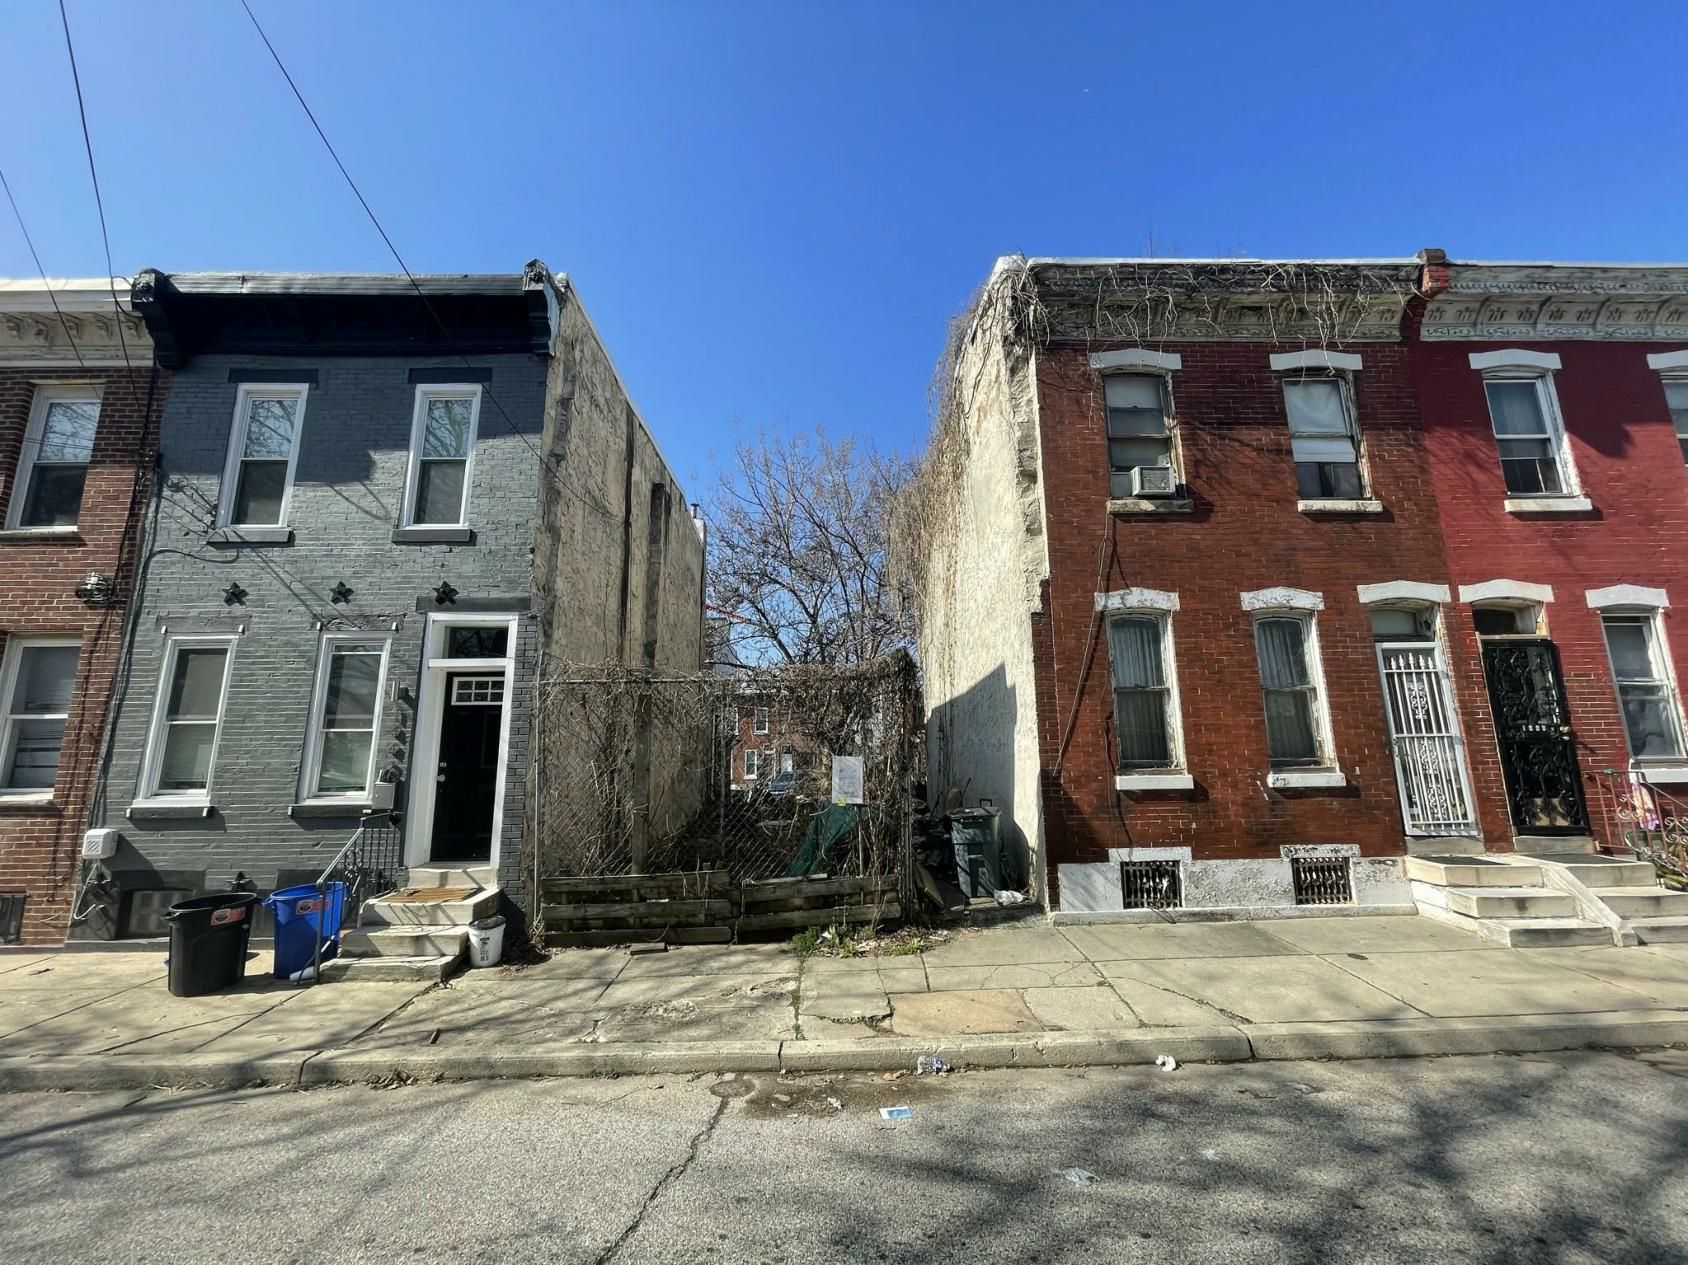 1444 North Etting Street. Site conditions prior to redevelopment. Looking west. Credit: Moto Designshop via the City of Philadelphia